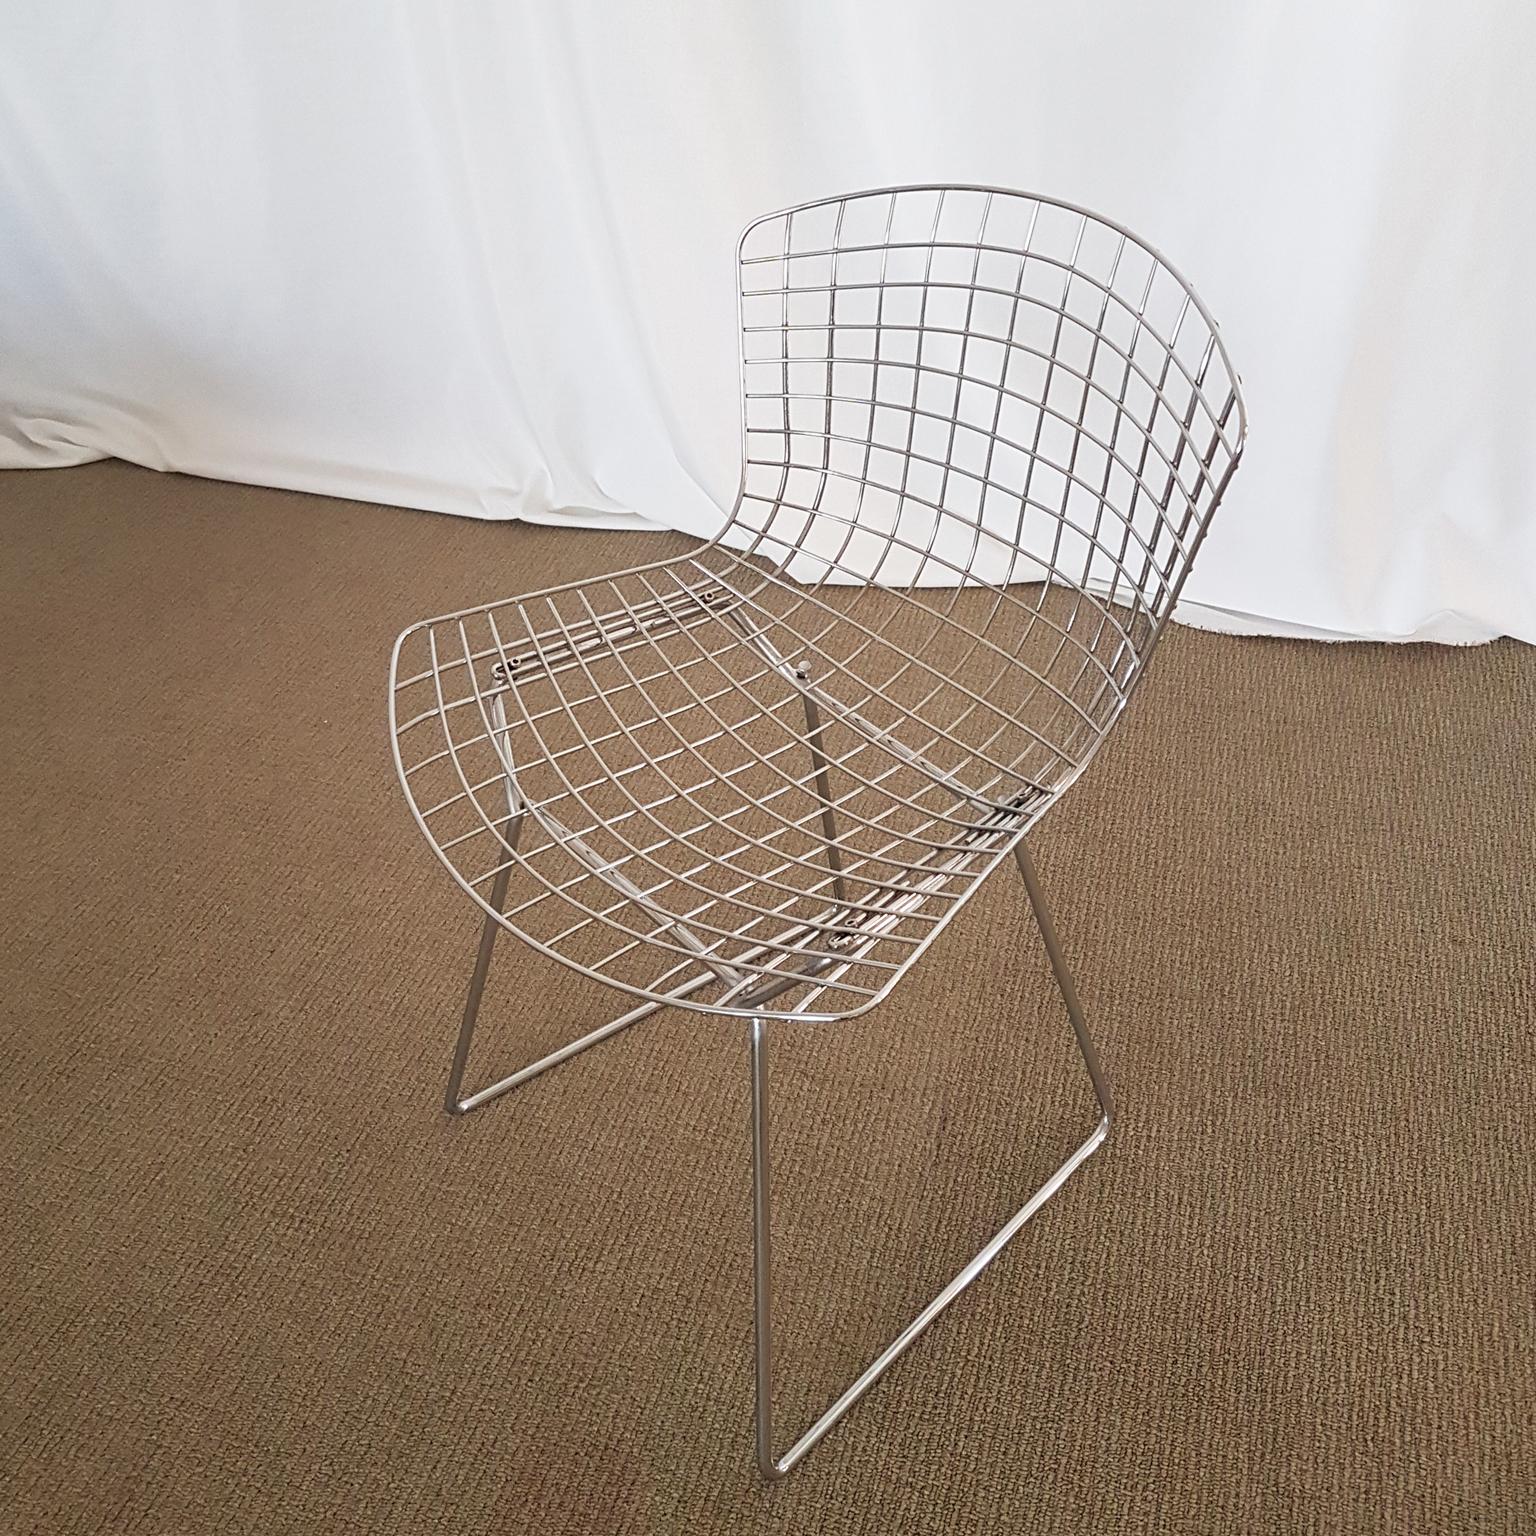 Side chair with frame in welded steel wire, polished and chrome plated.
Cushion in foam covered in red fabric. It can be removed
Design drawing 1952 by Harry Bertoia.
The item comes from Alivar Museum collection.
The concept of this Collection